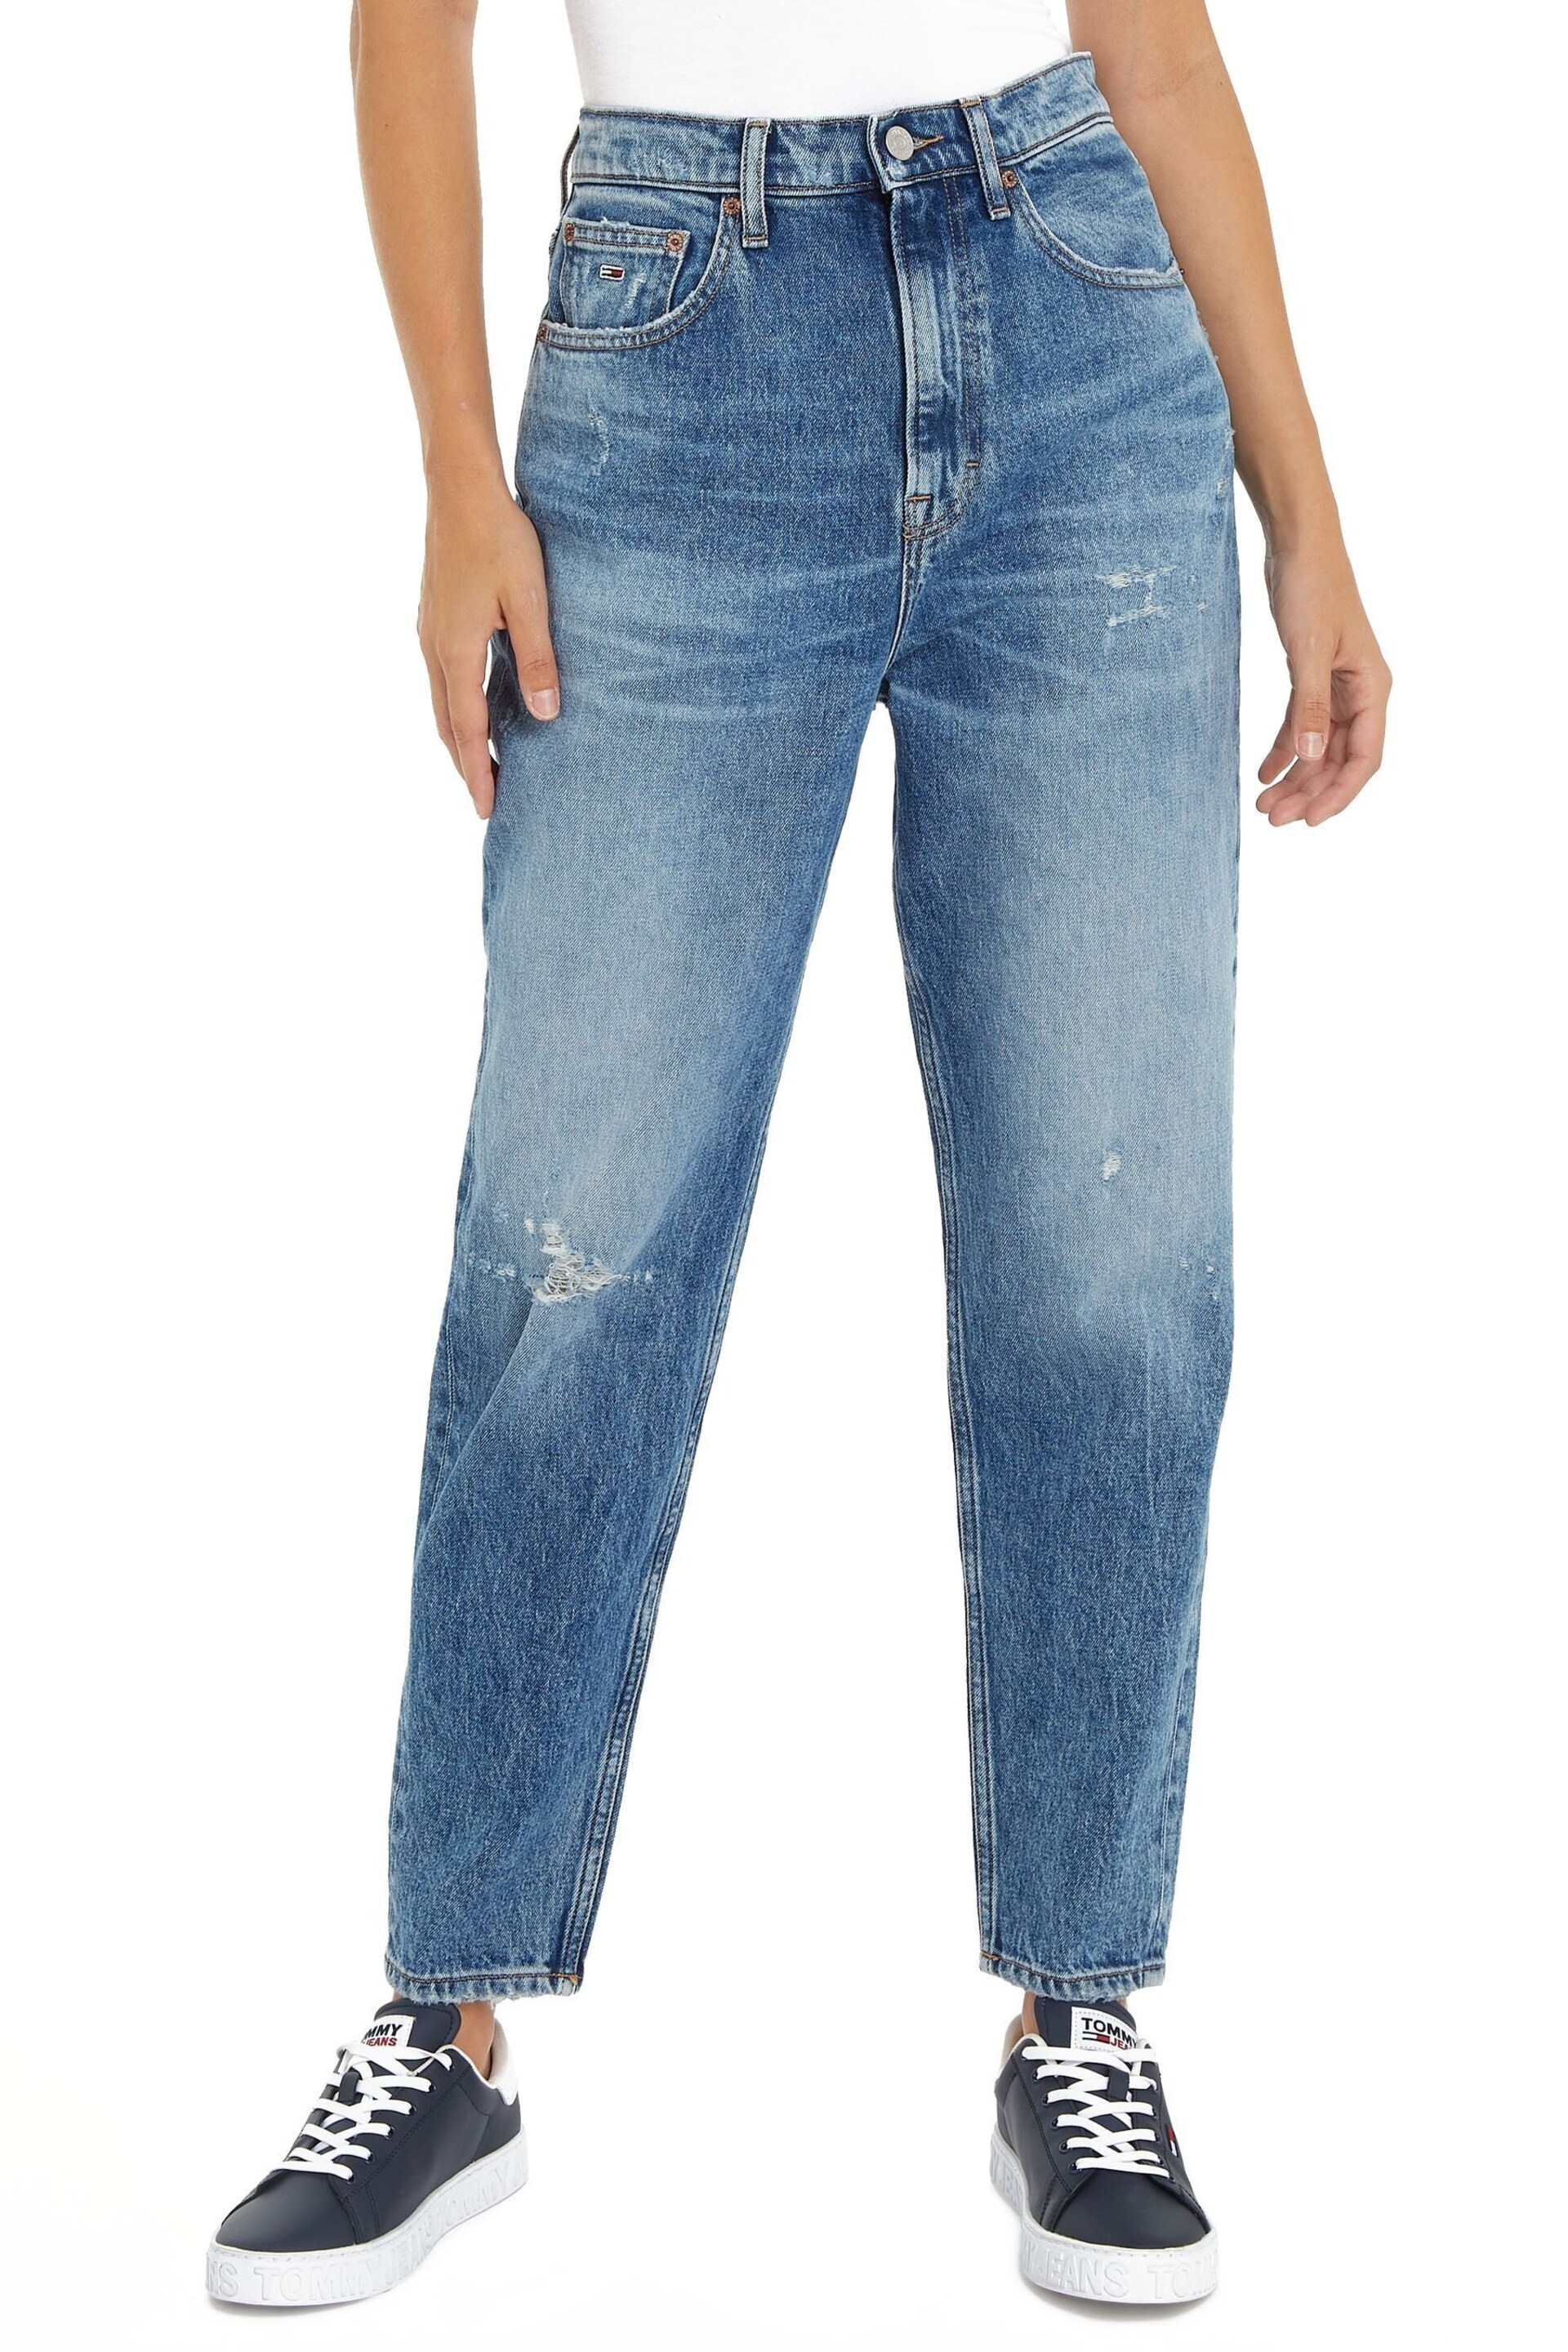 Tommy Jeans Mom Blue Jeans - Image 1 of 6